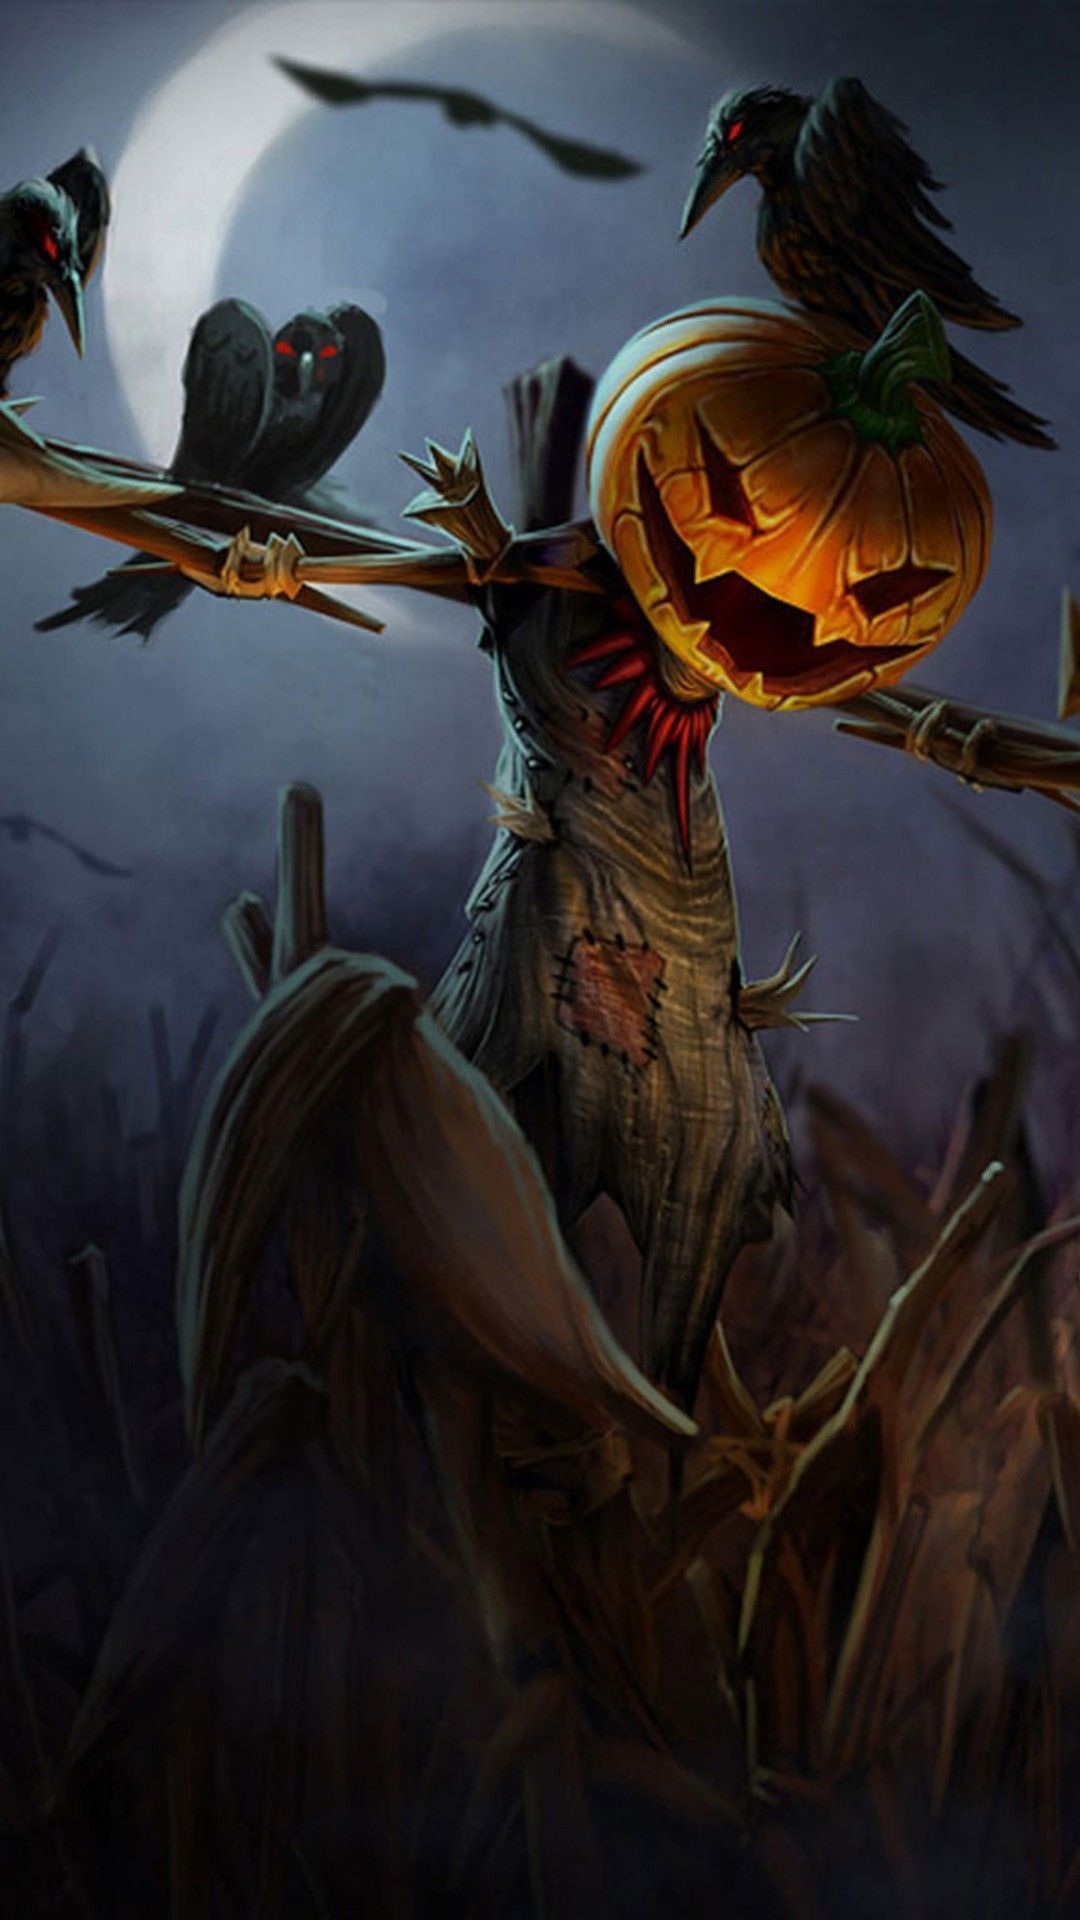 Scary HD Wallpaper Android. Scary wallpaper, Halloween wallpaper, Halloween artwork